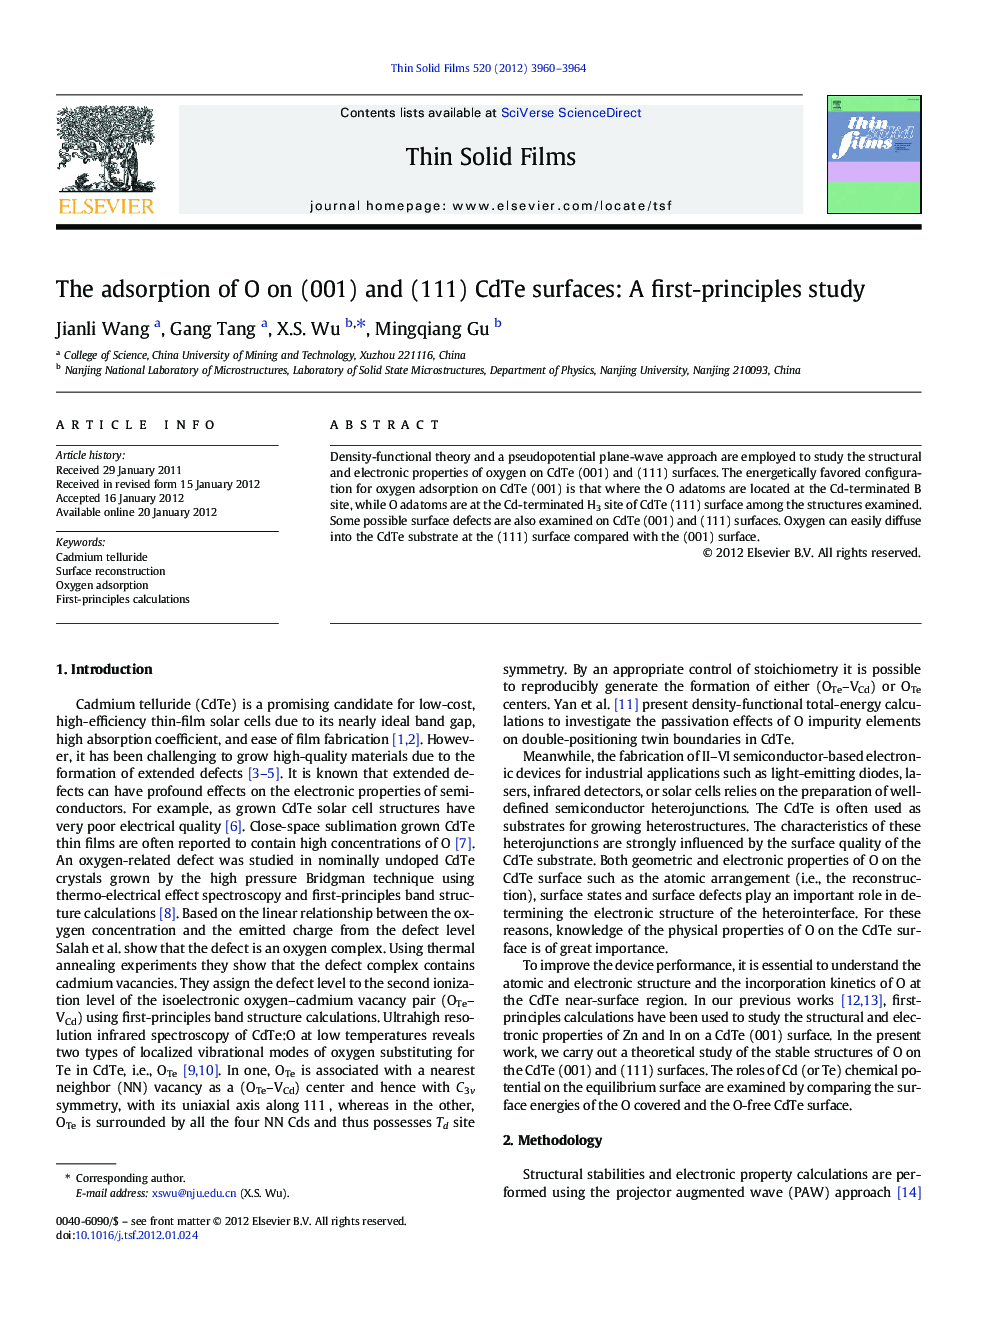 The adsorption of O on (001) and (111) CdTe surfaces: A first-principles study